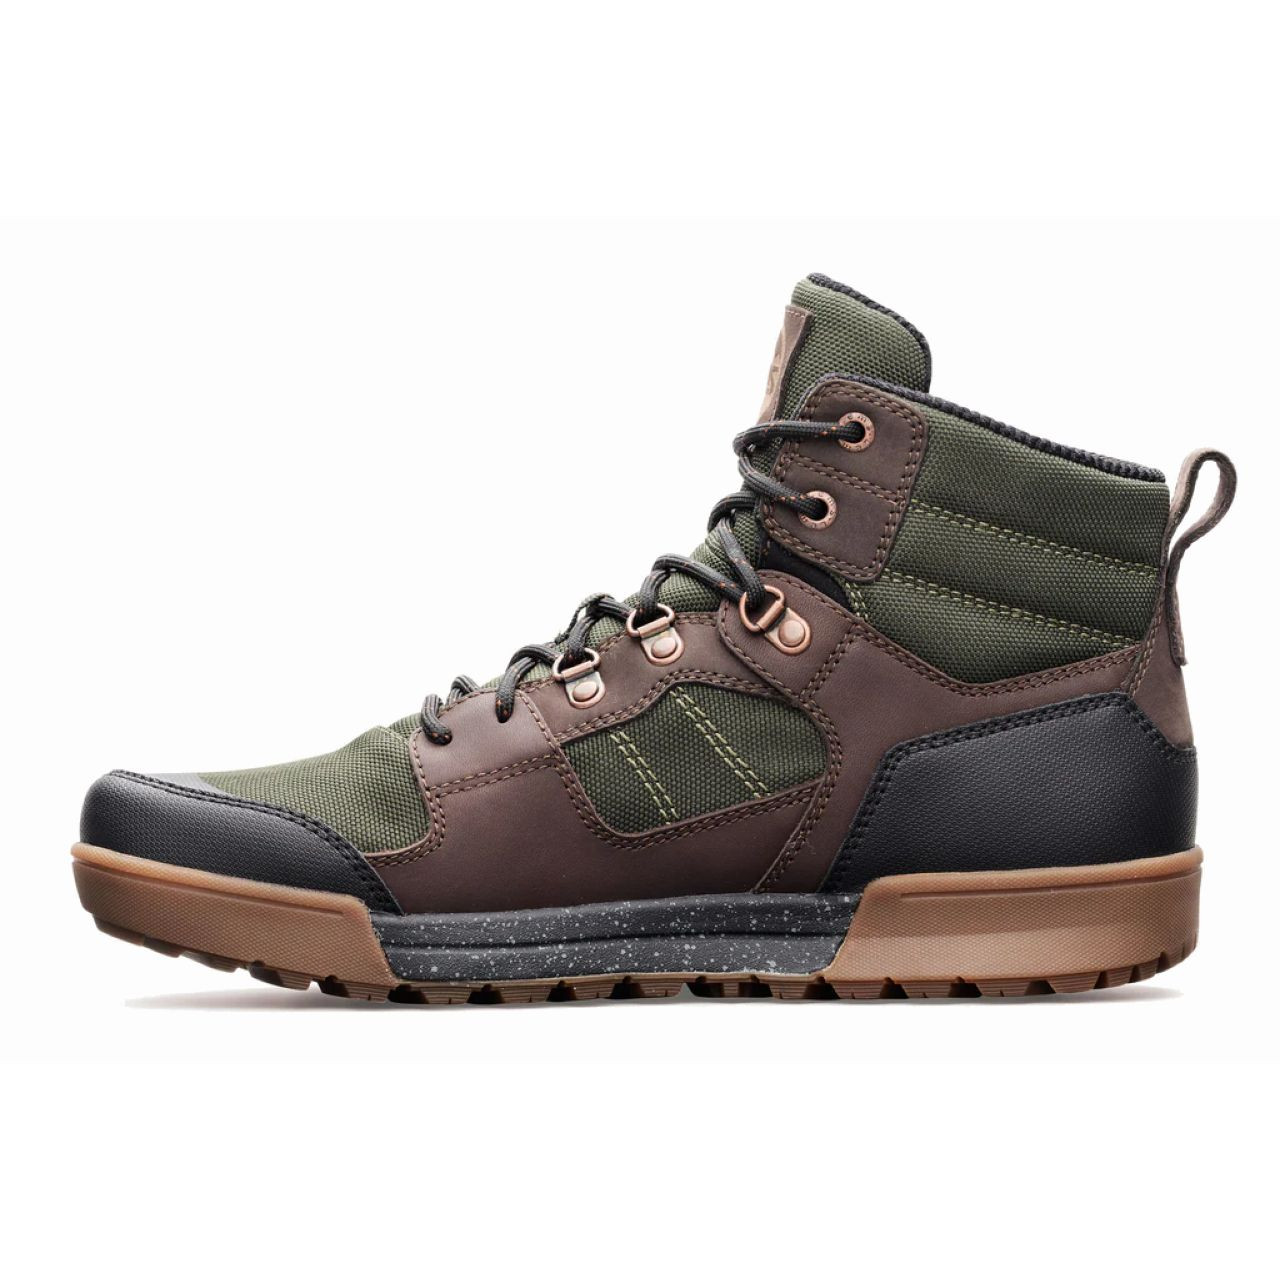 Lems Outlander - Unisex | Hiking Boots | Waterproof Boots & Shoes